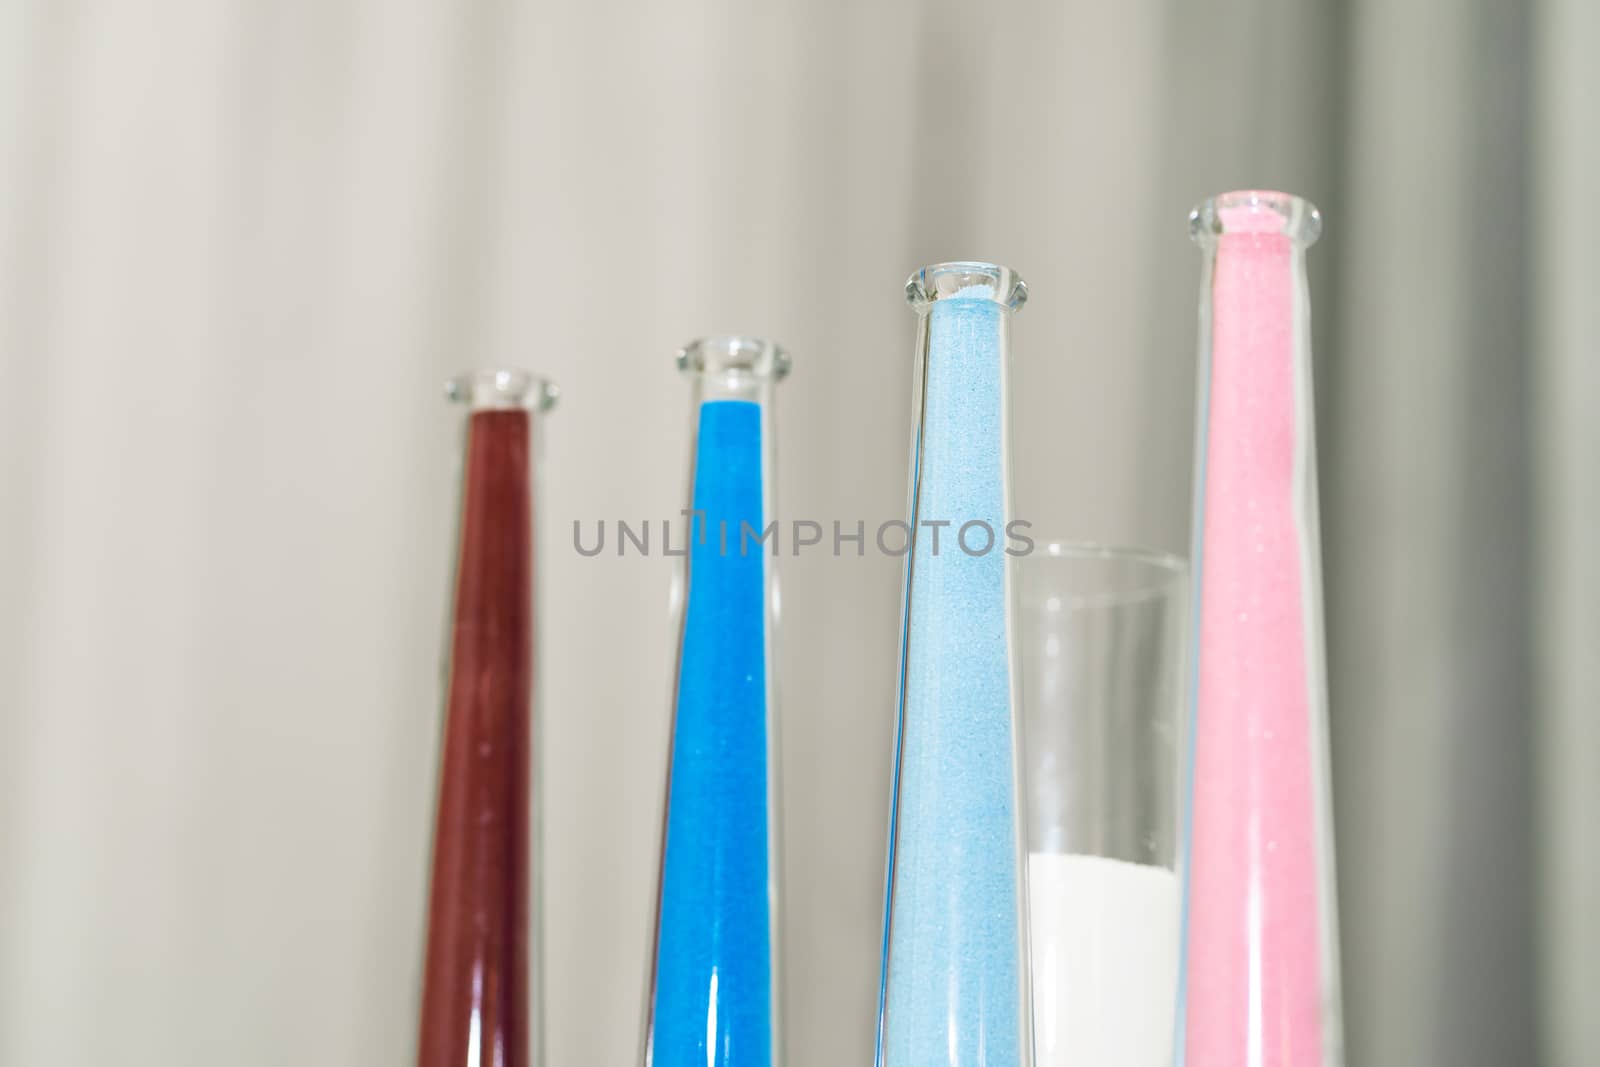 Stylish decorative glass colored vases for fresh flowers decorating the festive table